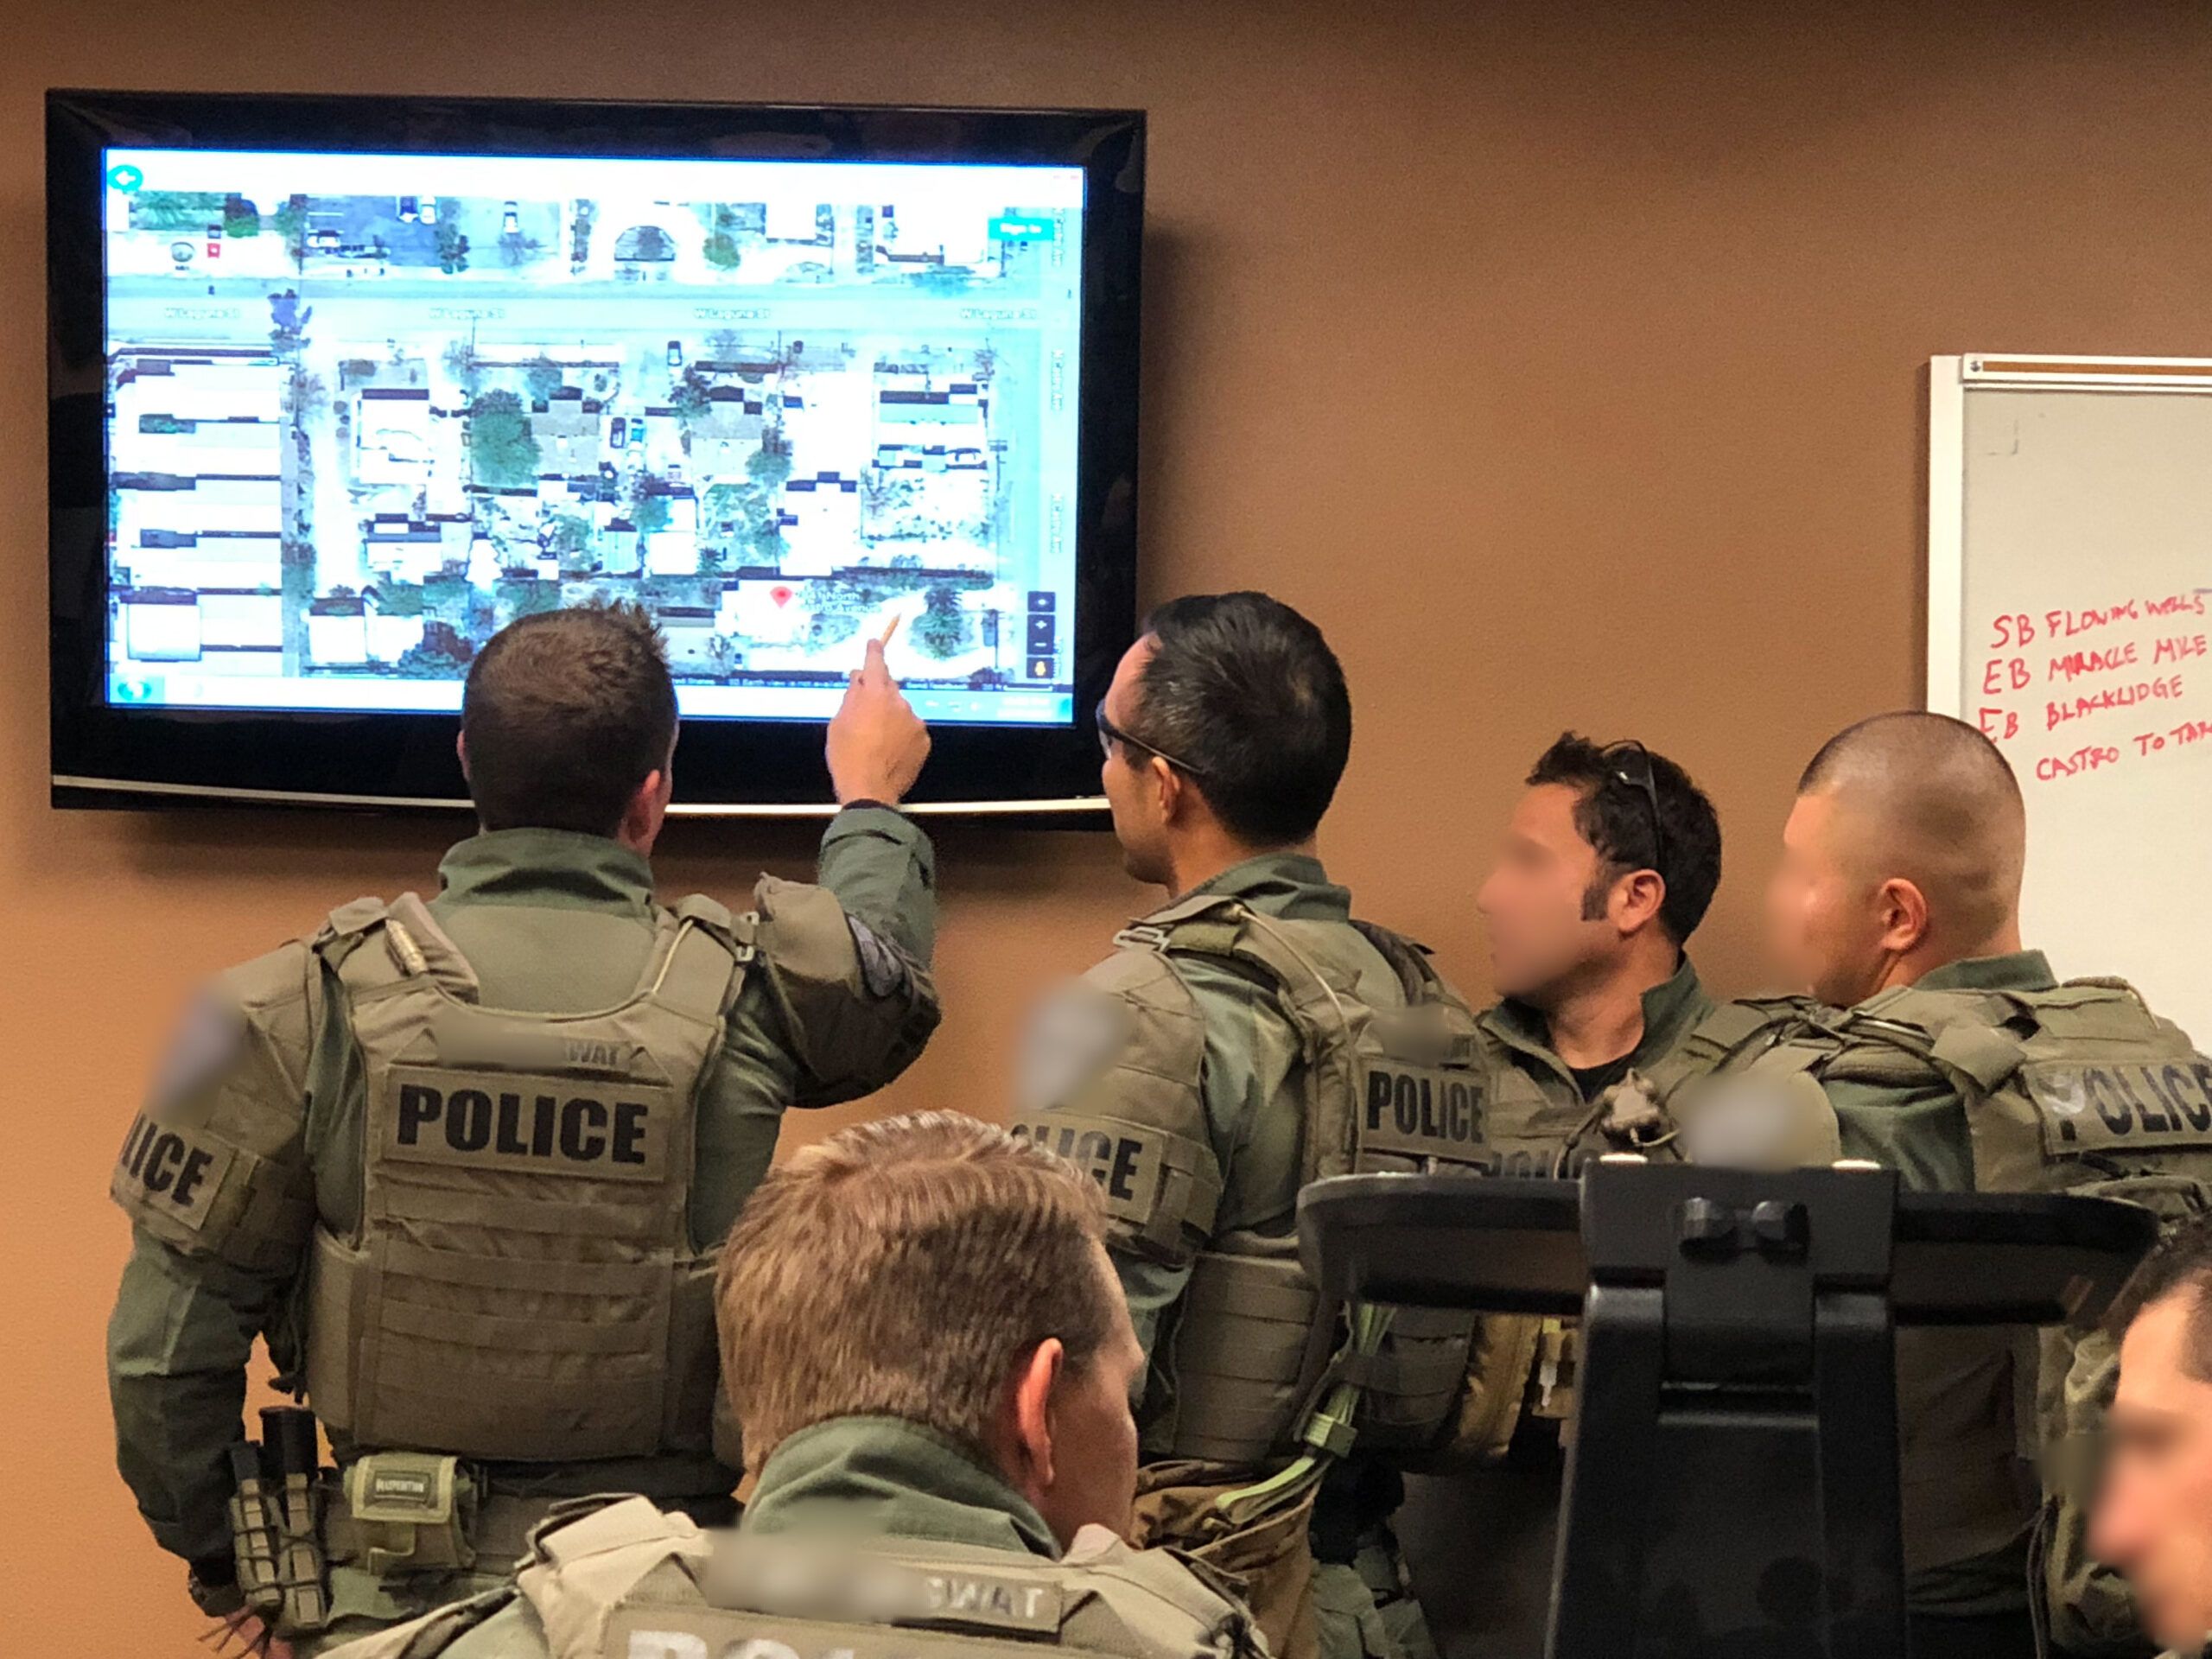 Police SWAT operators planning over a digital map on a television mounted on the wall